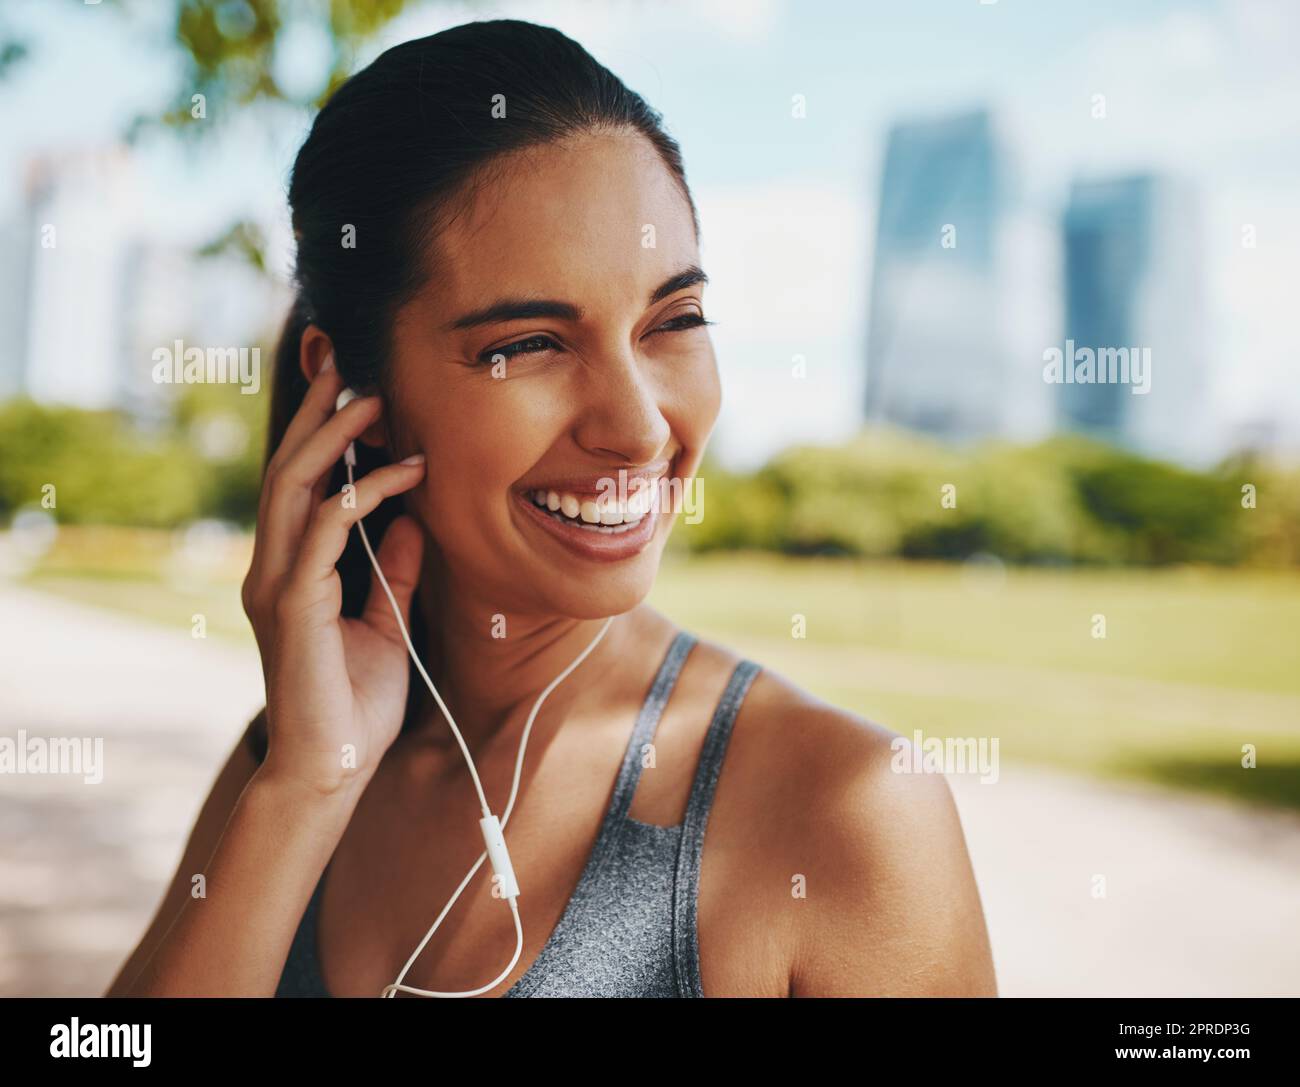 Shes found just the perfect soundtrack. an attractive young sportswoman listening to music while working out outdoors in the city. Stock Photo